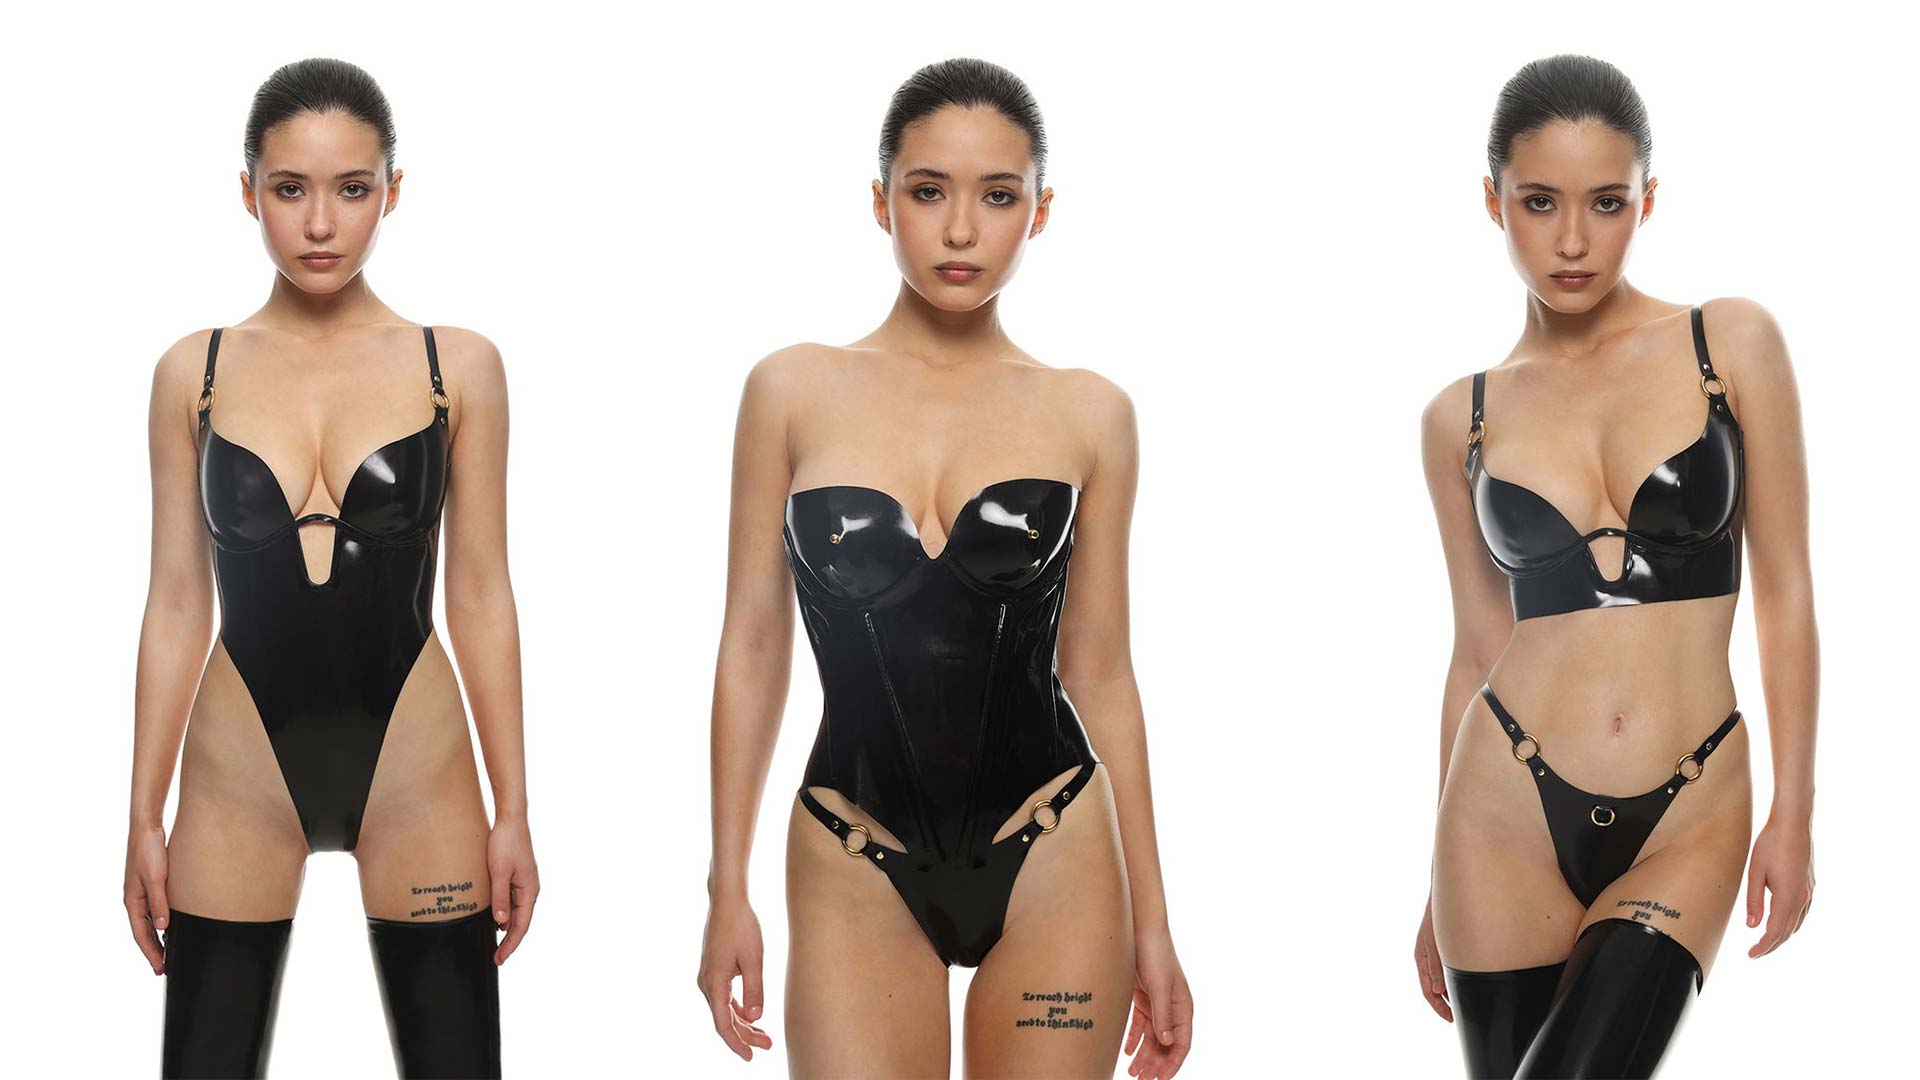 Anoeses Expands Their Latex Range with LTX.2 - Latex24/7